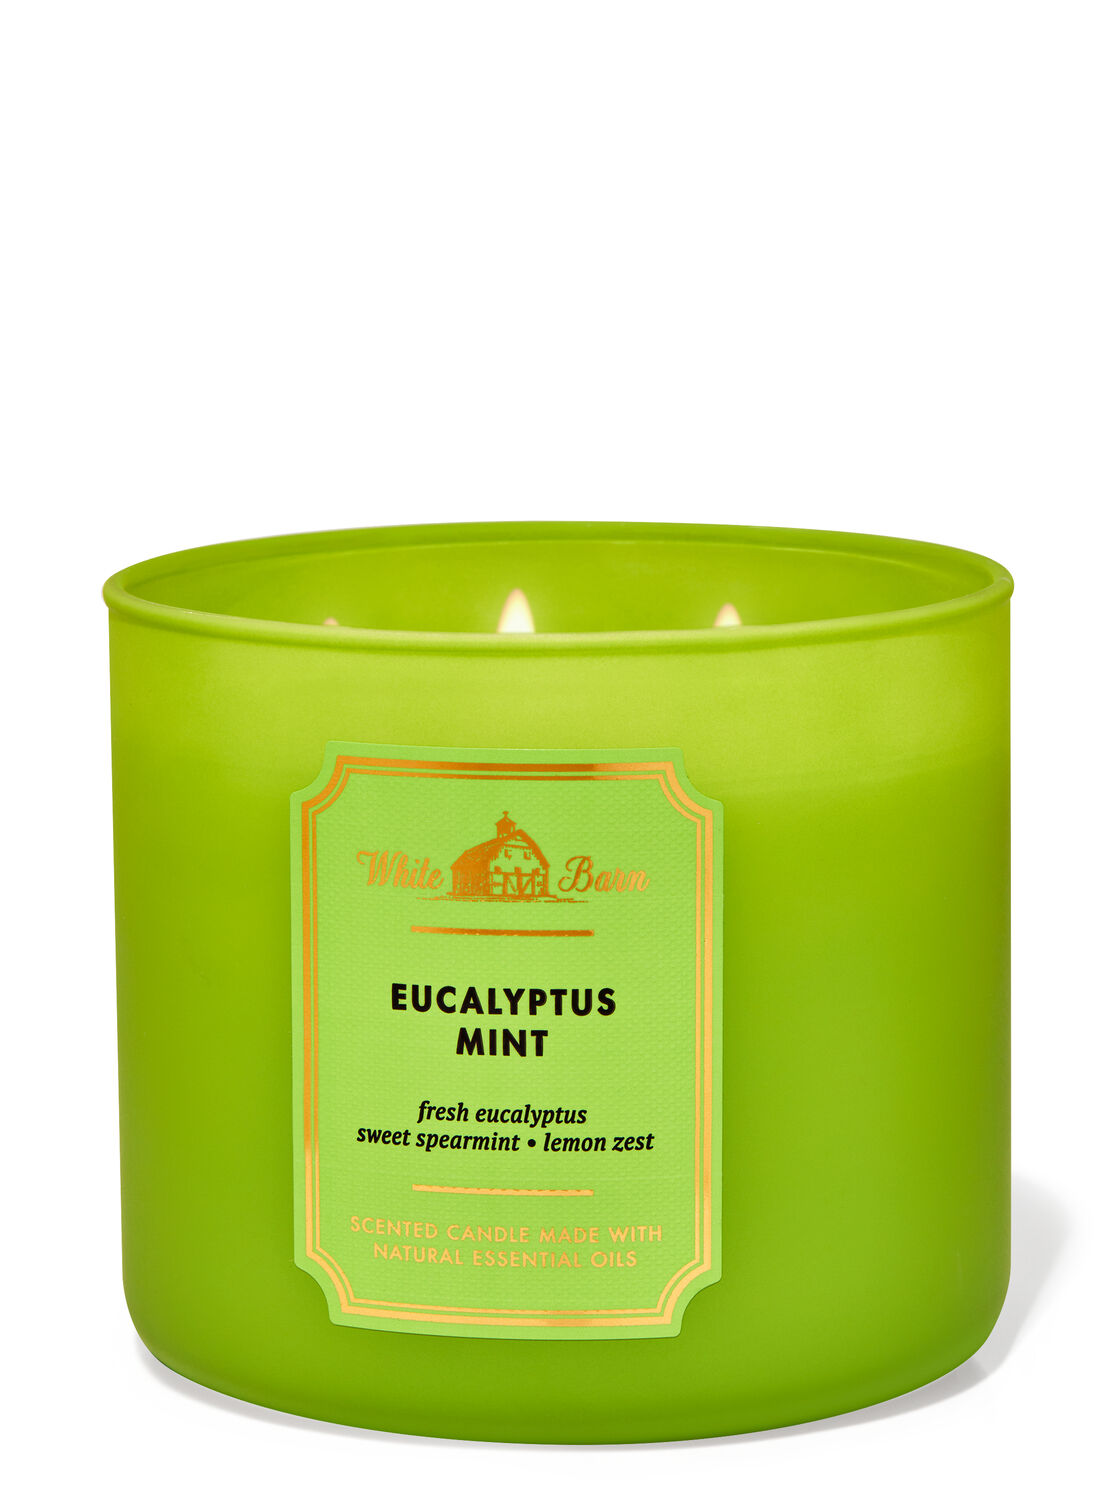 2 Bath Body Works BUTTERCREAM MINT 3-Wick Filled Candle 14.5 oz 